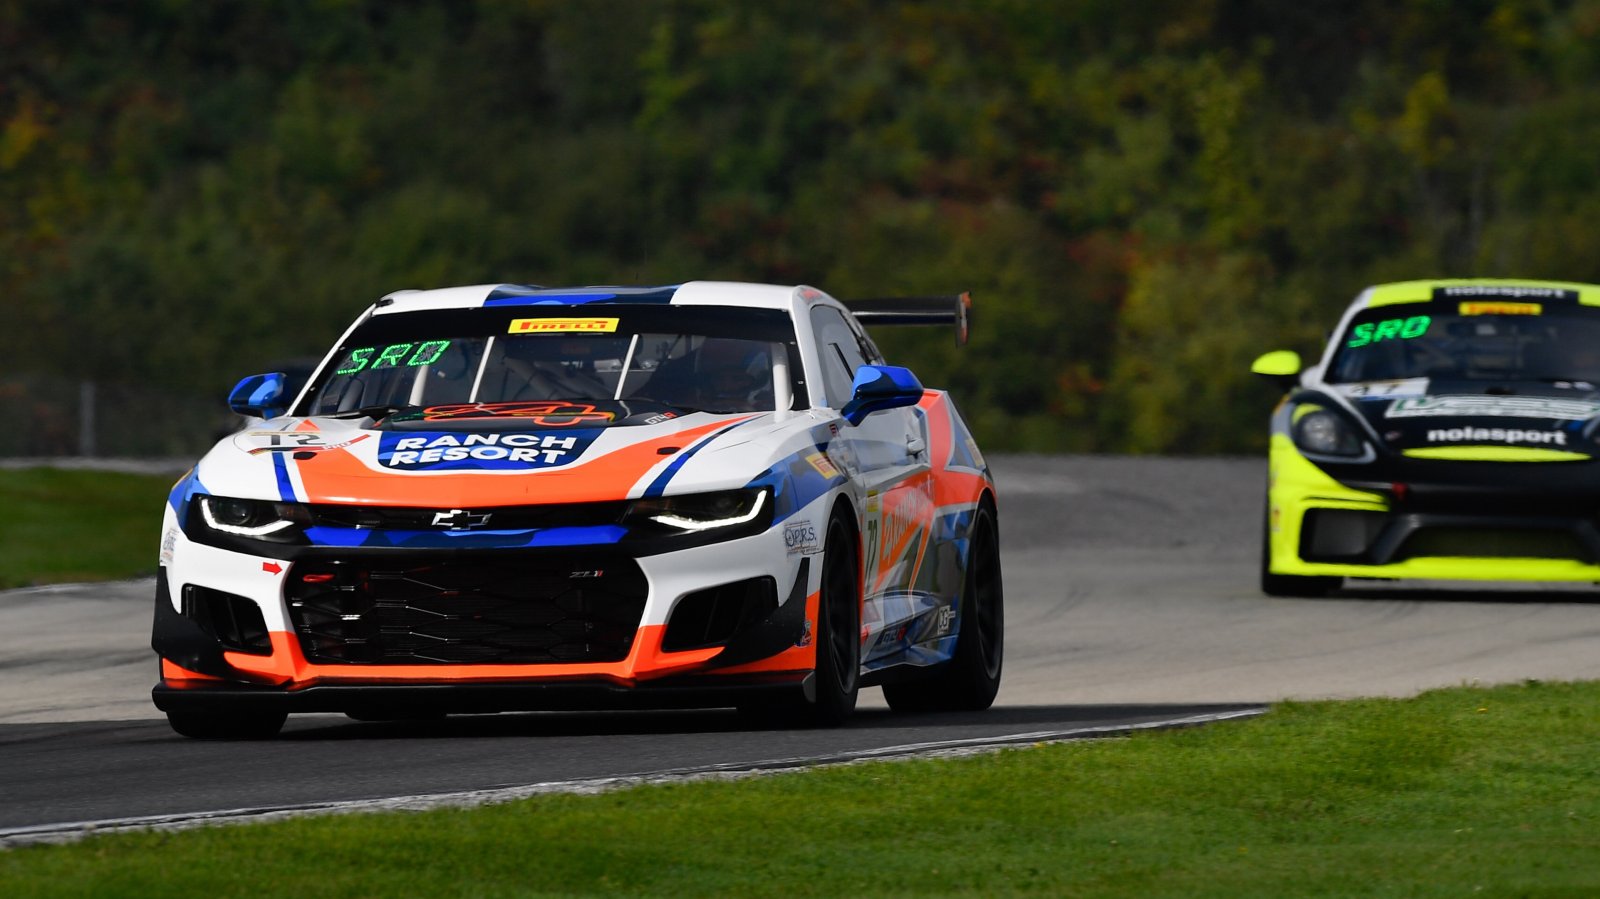 Lewis tops the timesheets in combined Pirelli GT4 America practice session 1 from Road America